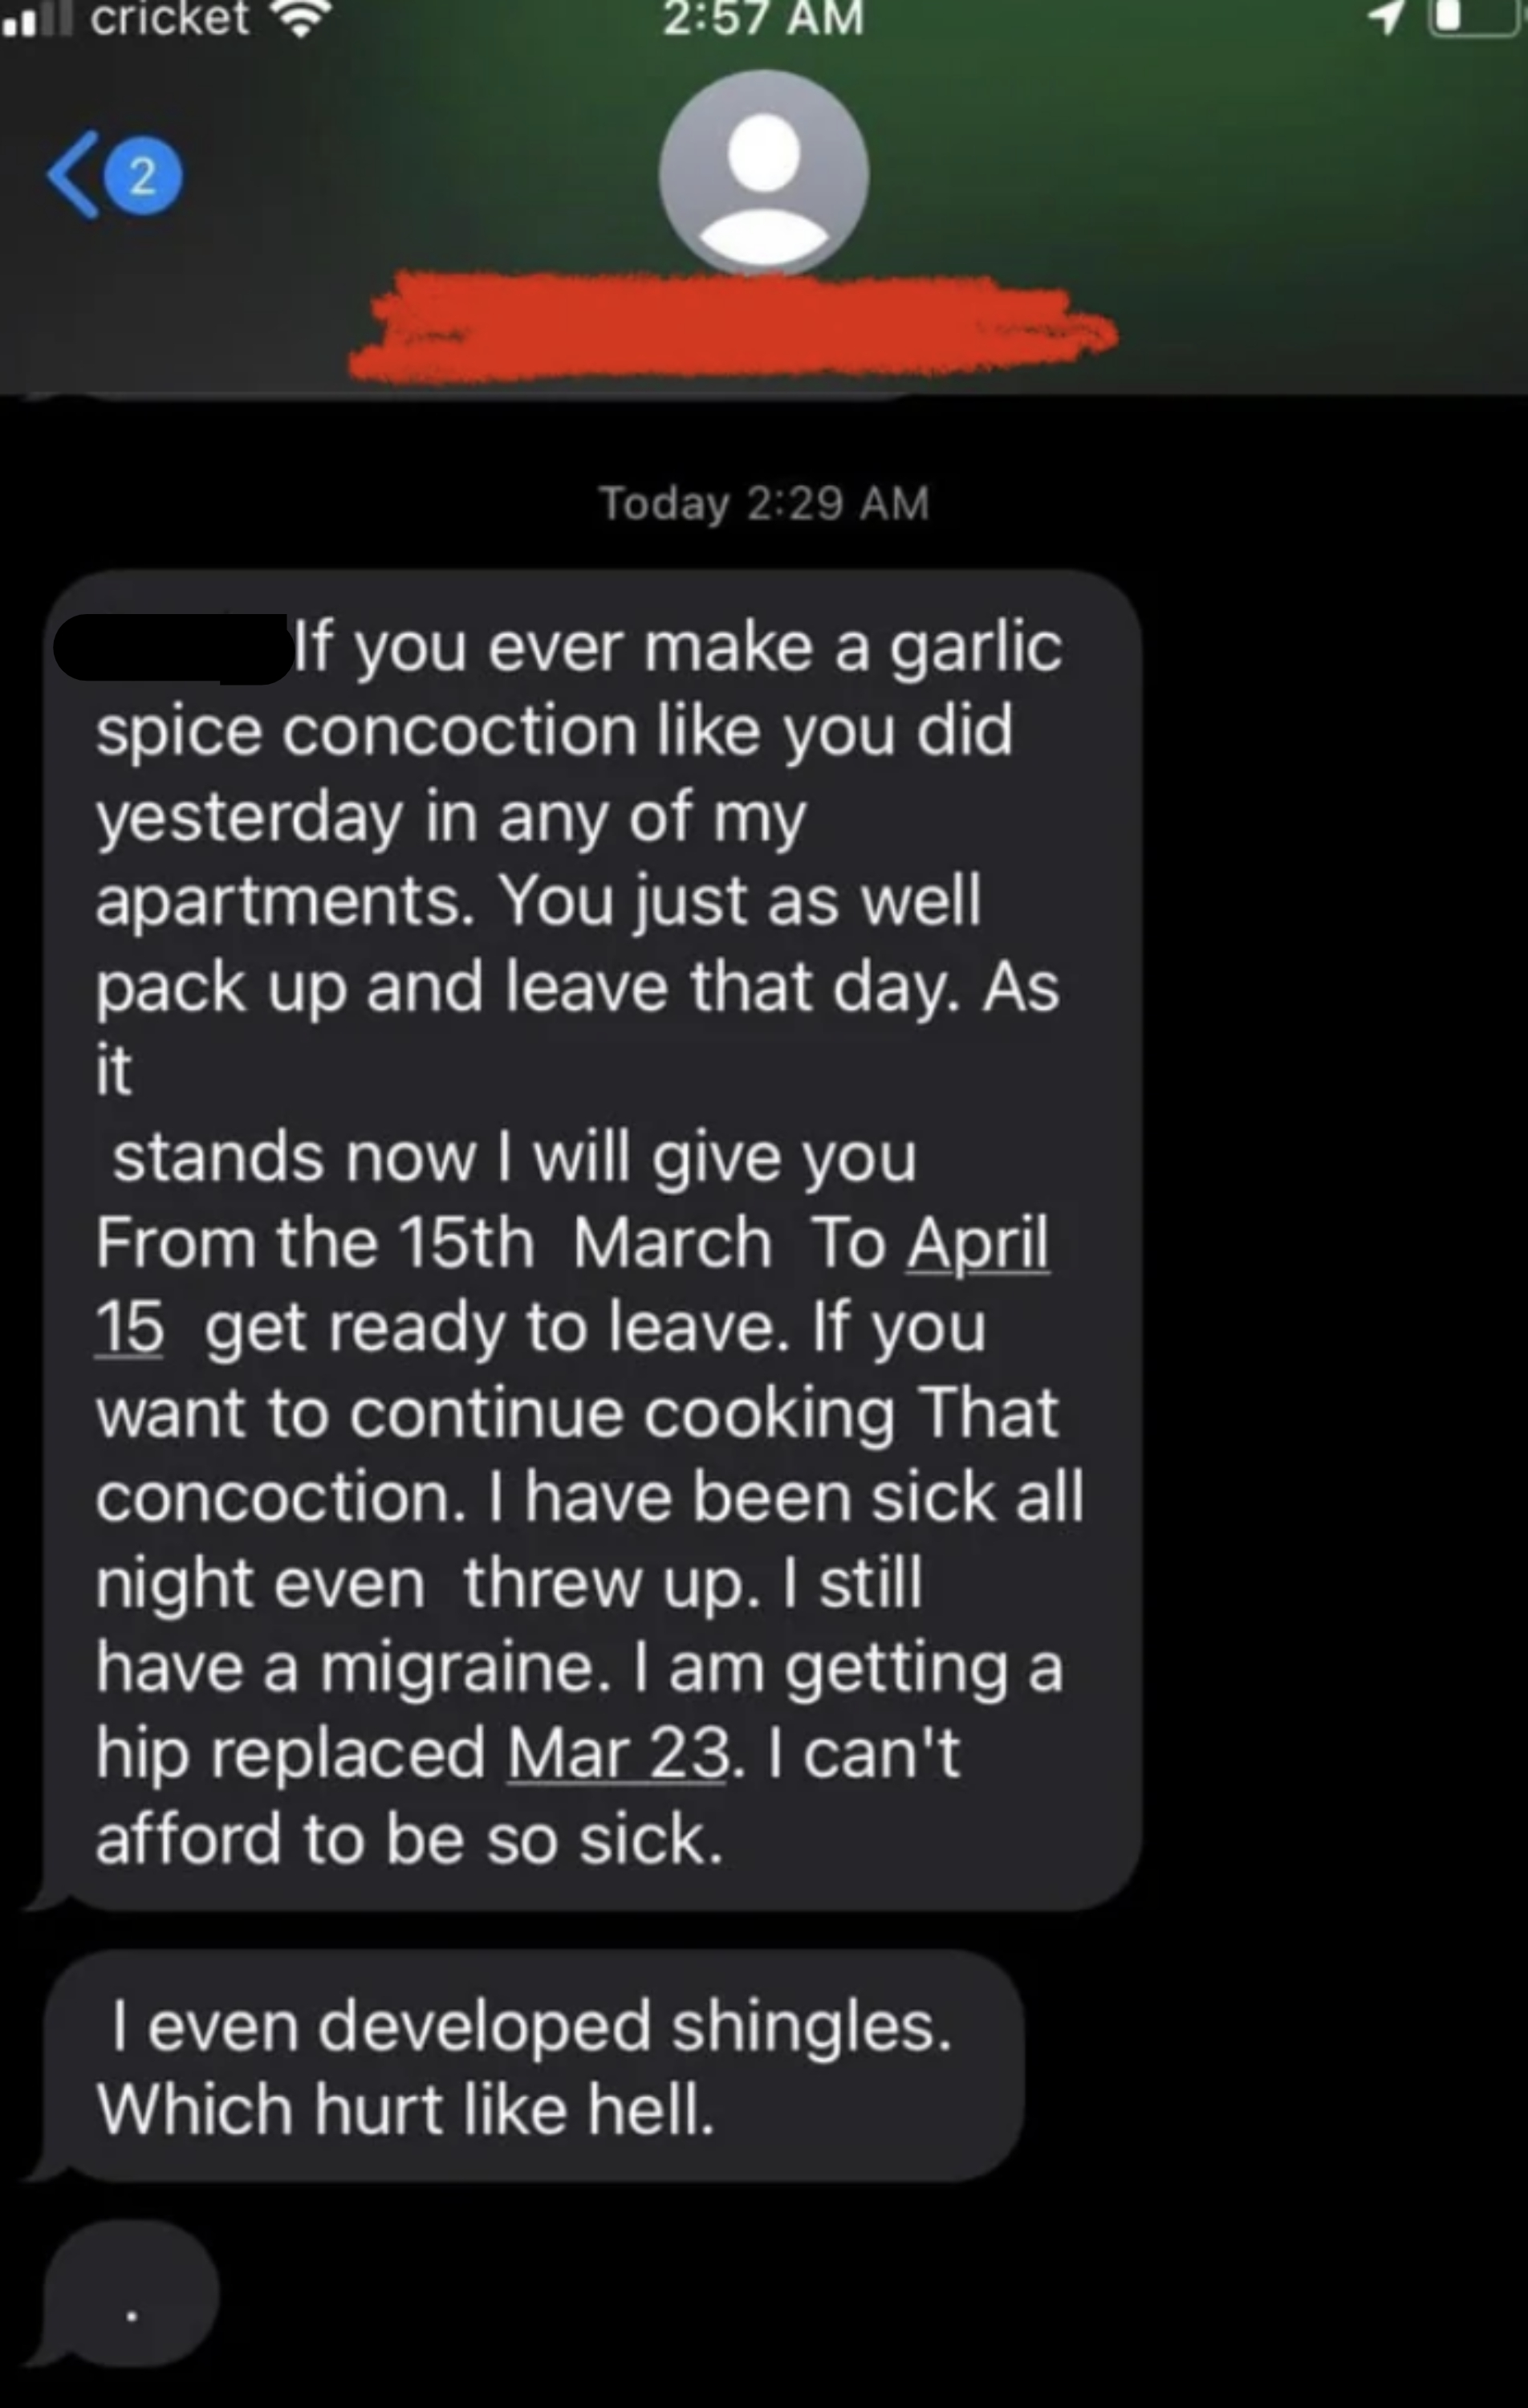 Text message conversation discussing feeling ill, making spice concoctions, and having shingles